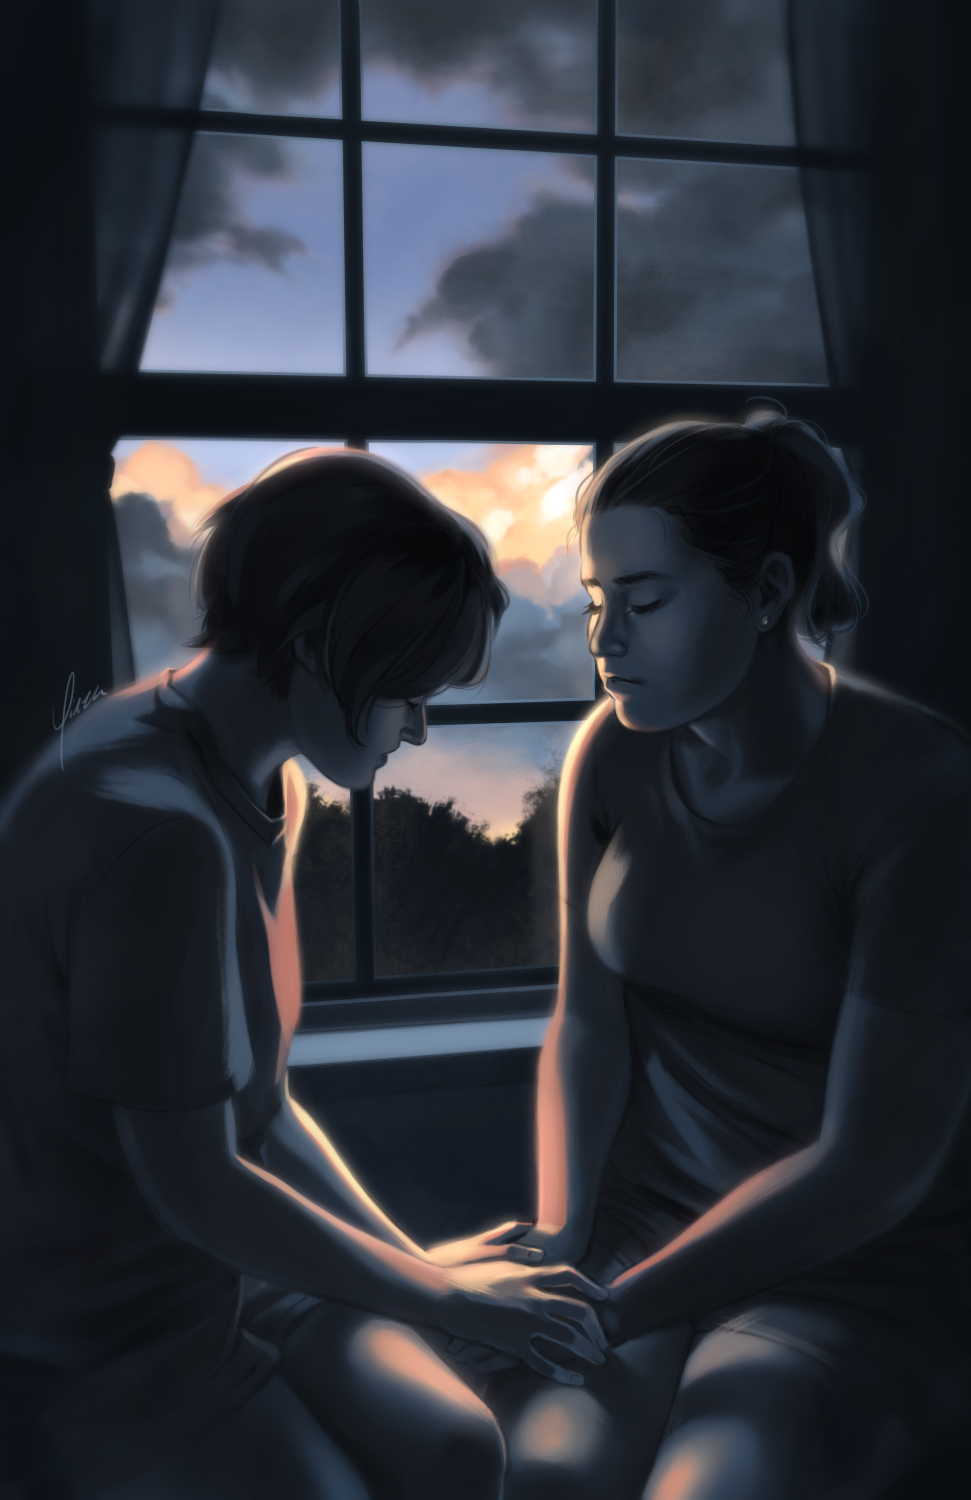 A digital painting of two teenage girls sitting in front of a window. It is early twilight outside, with the last of the sunset light catching some of the clouds and making them glow. There is no light on inside the room, so the girls are backlit by the light from the window. Both girls look down as one girl gently takes the other girl's hands in hers, her expression pensive. The other girl looks unsure but not unreceptive.